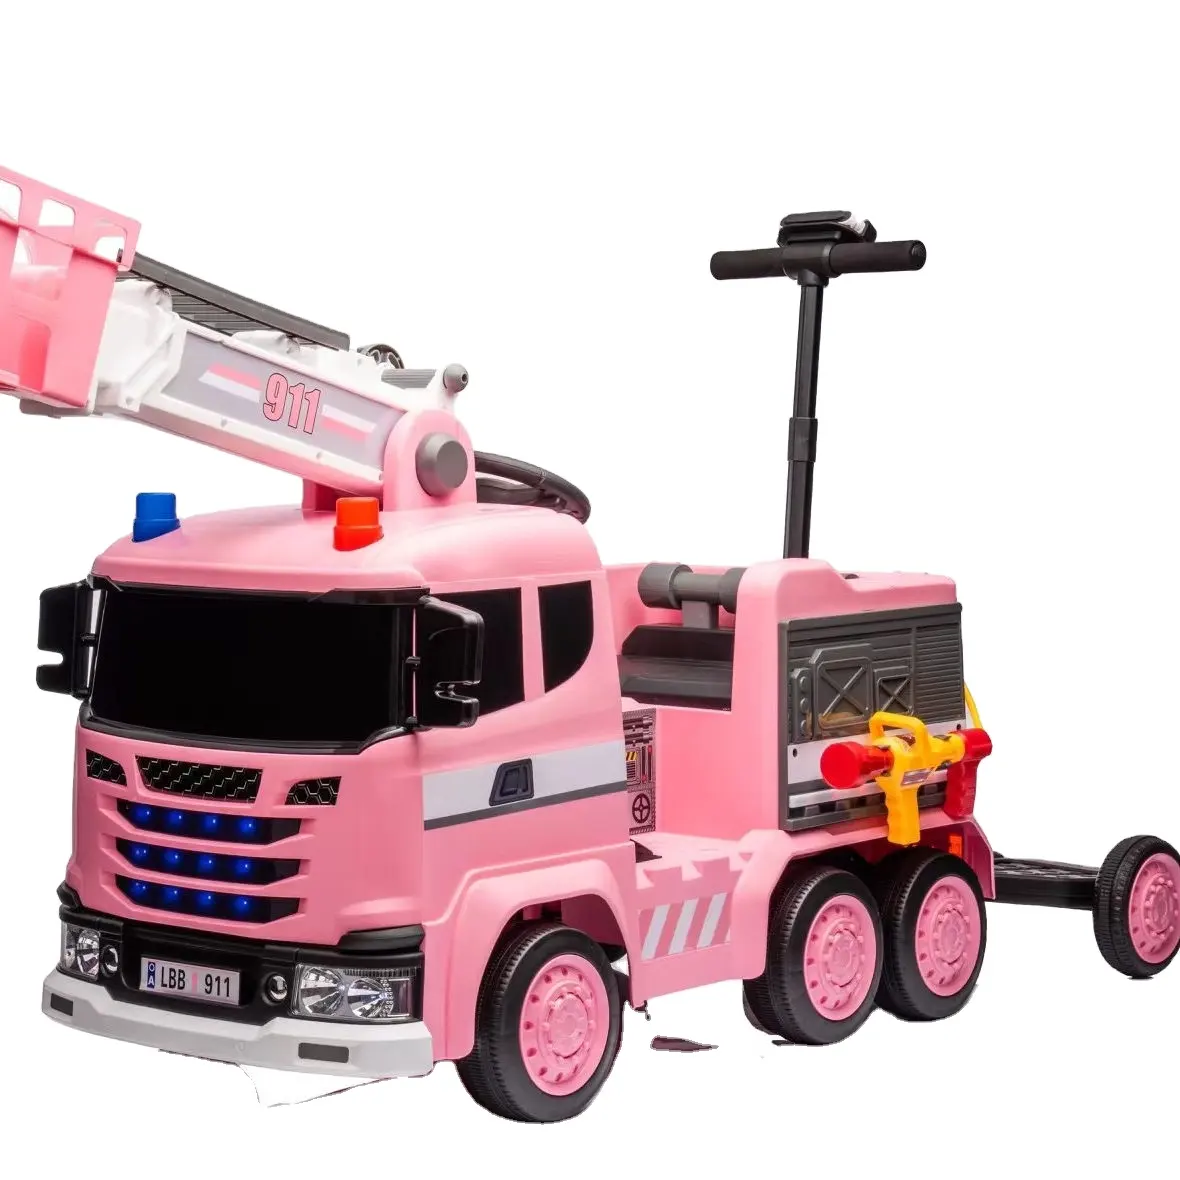 The latest design of a children's fire truck simulation sprinkler in 2024, with a light off spray gun